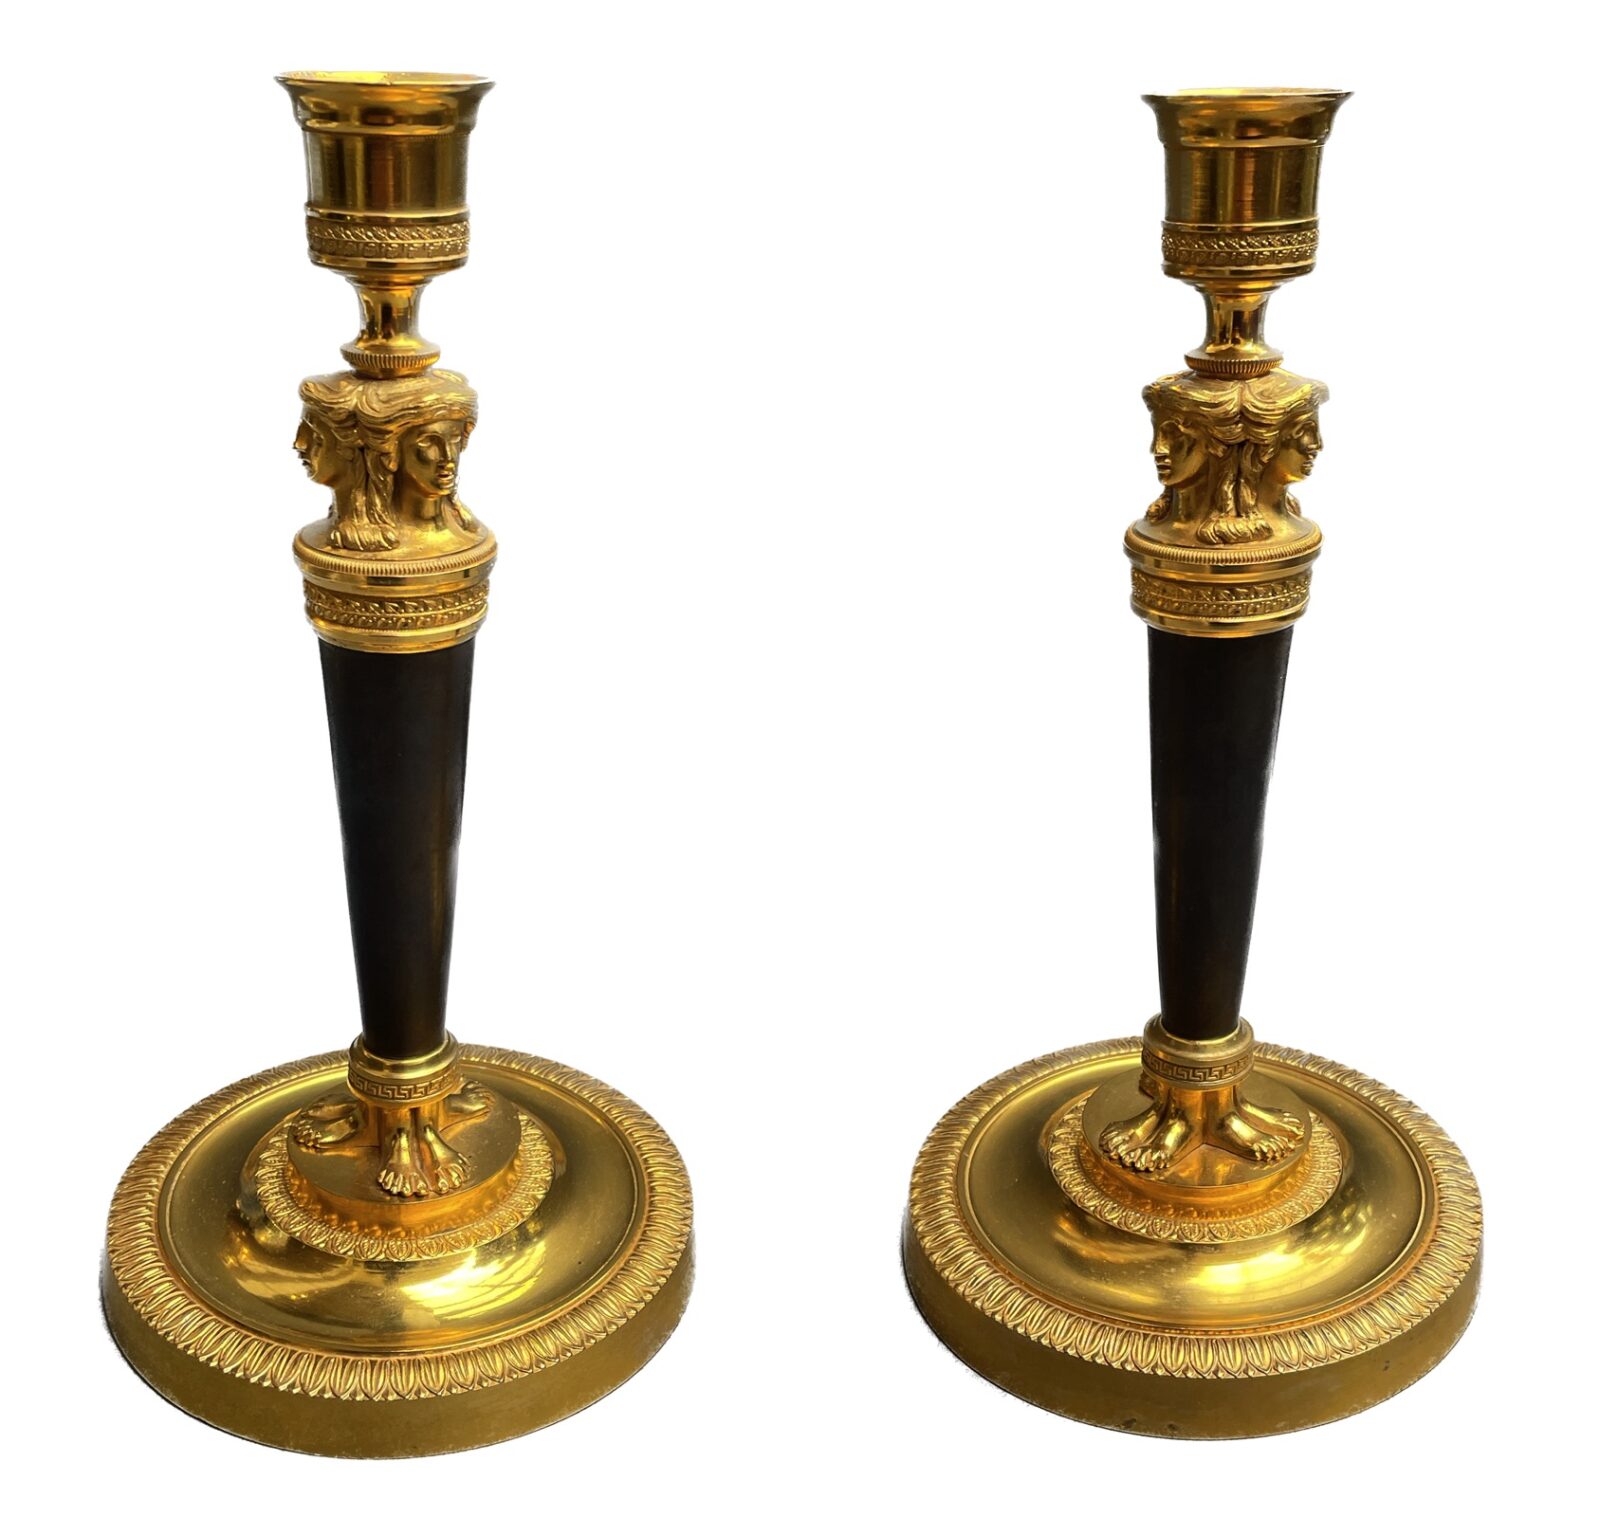 Lot - A pair of gilt brass pricket candlesticks, French, 19th century